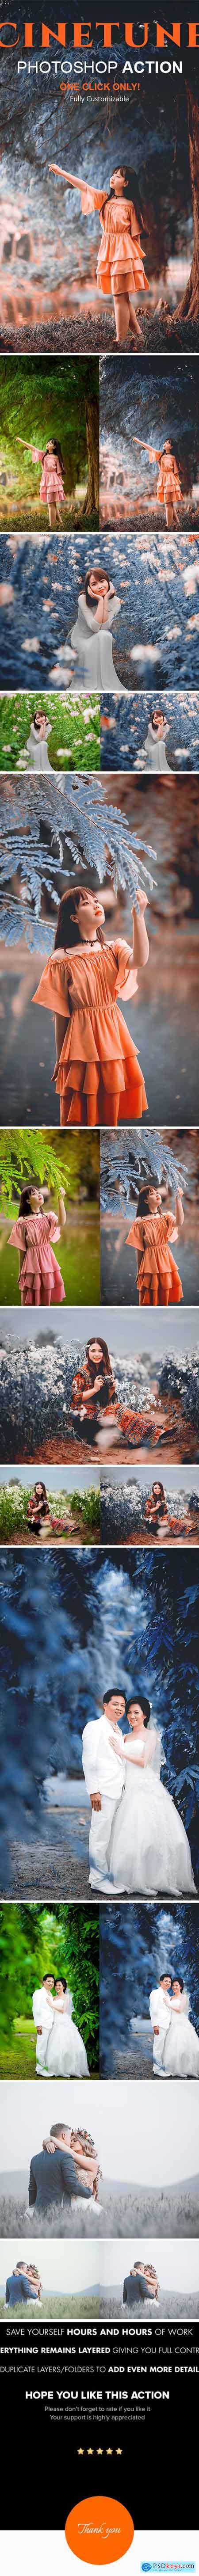 Cinetune cinematic color grading Effects Photoshop Action 24460869